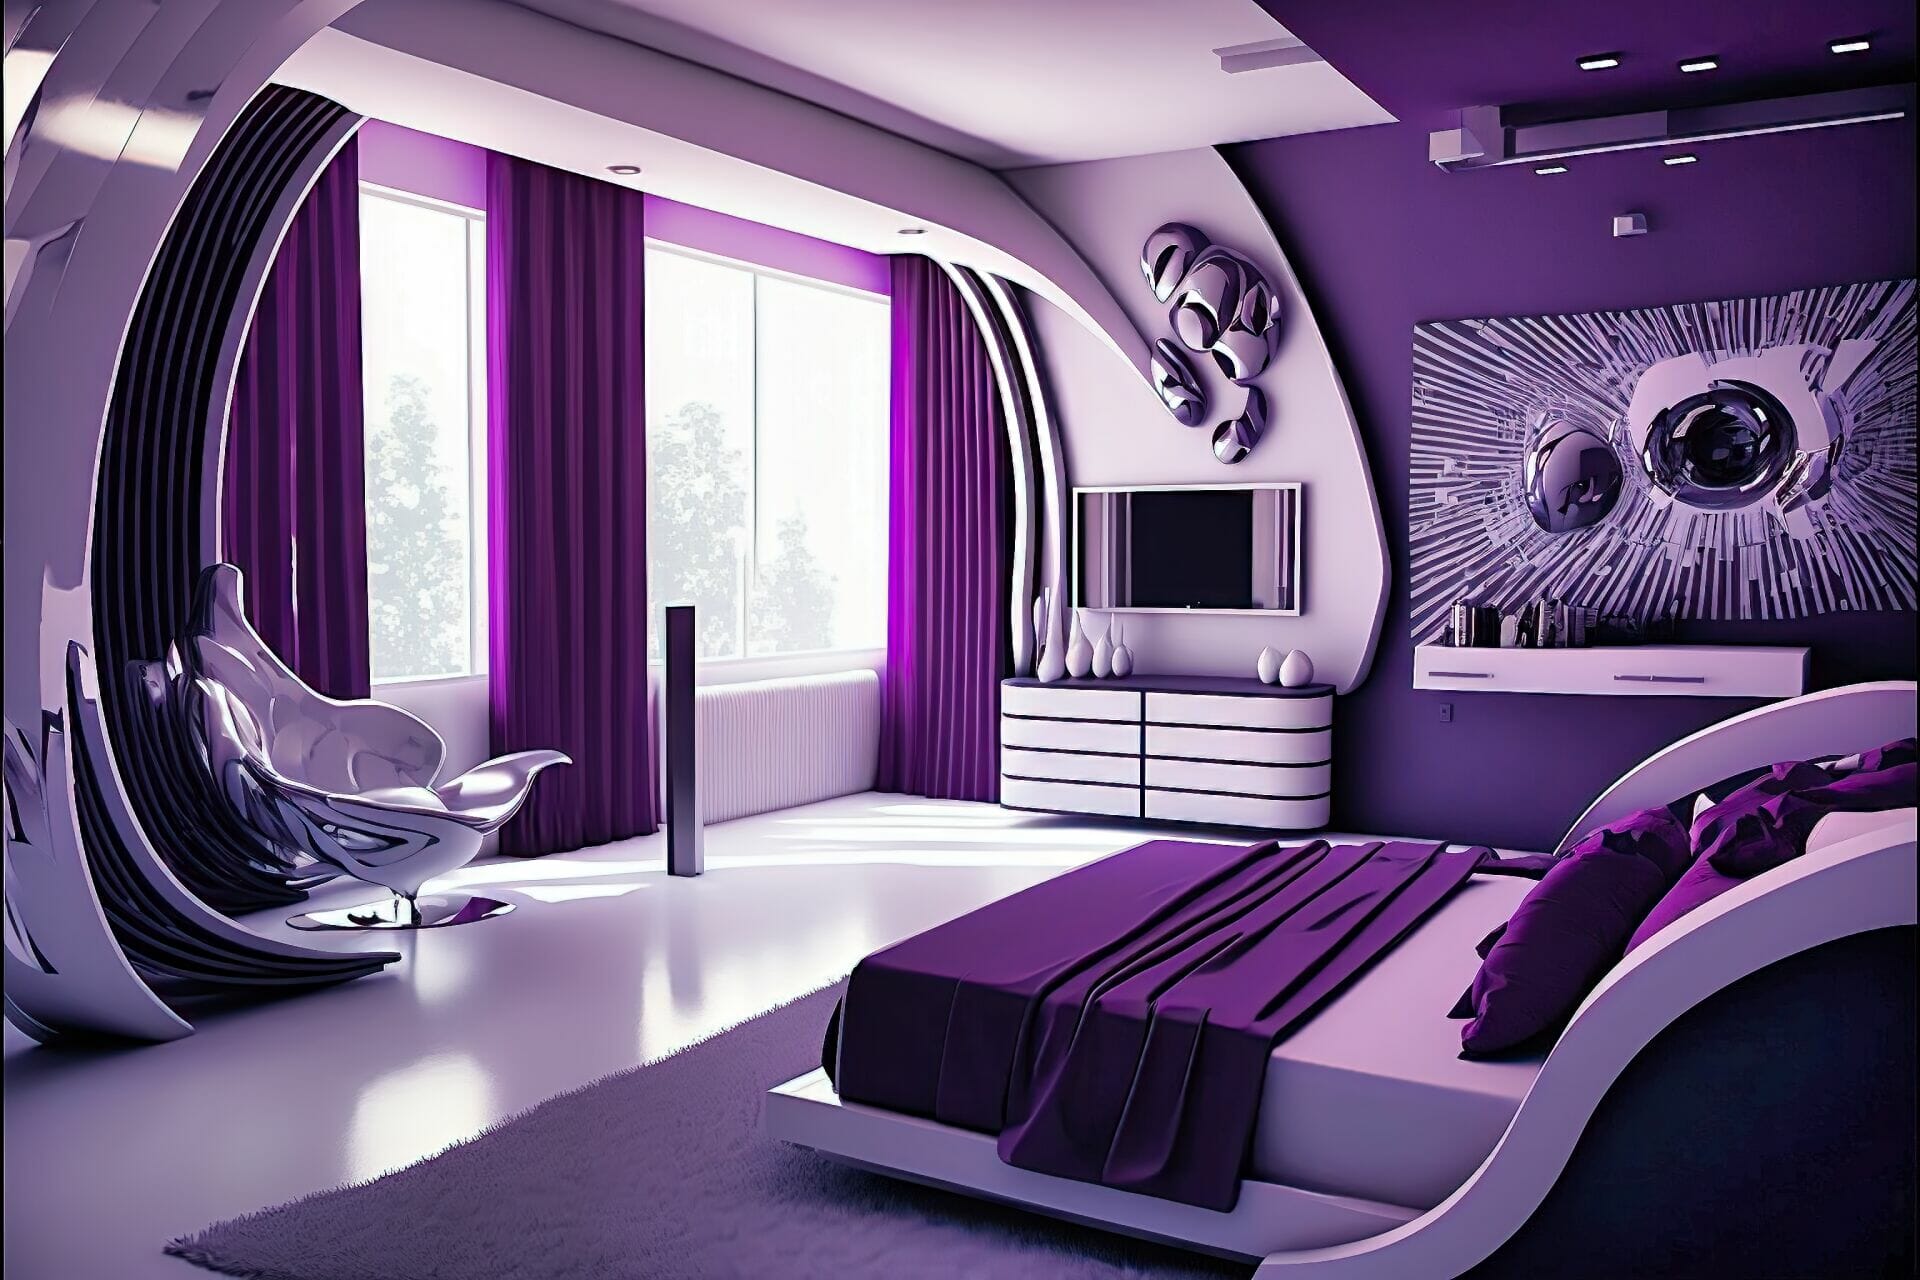 Futuristic Bedroom Featuring Bold Color And Sleek Lines: This Dynamic Bedroom Features Bold Purple Walls And Black, White, And Chrome Accents. A Large, Curved Bed Is The Centerpiece, And Is Surrounded By Sleek, Chrome Furniture Pieces And Vibrant Purple And Chrome-Accented Decor.